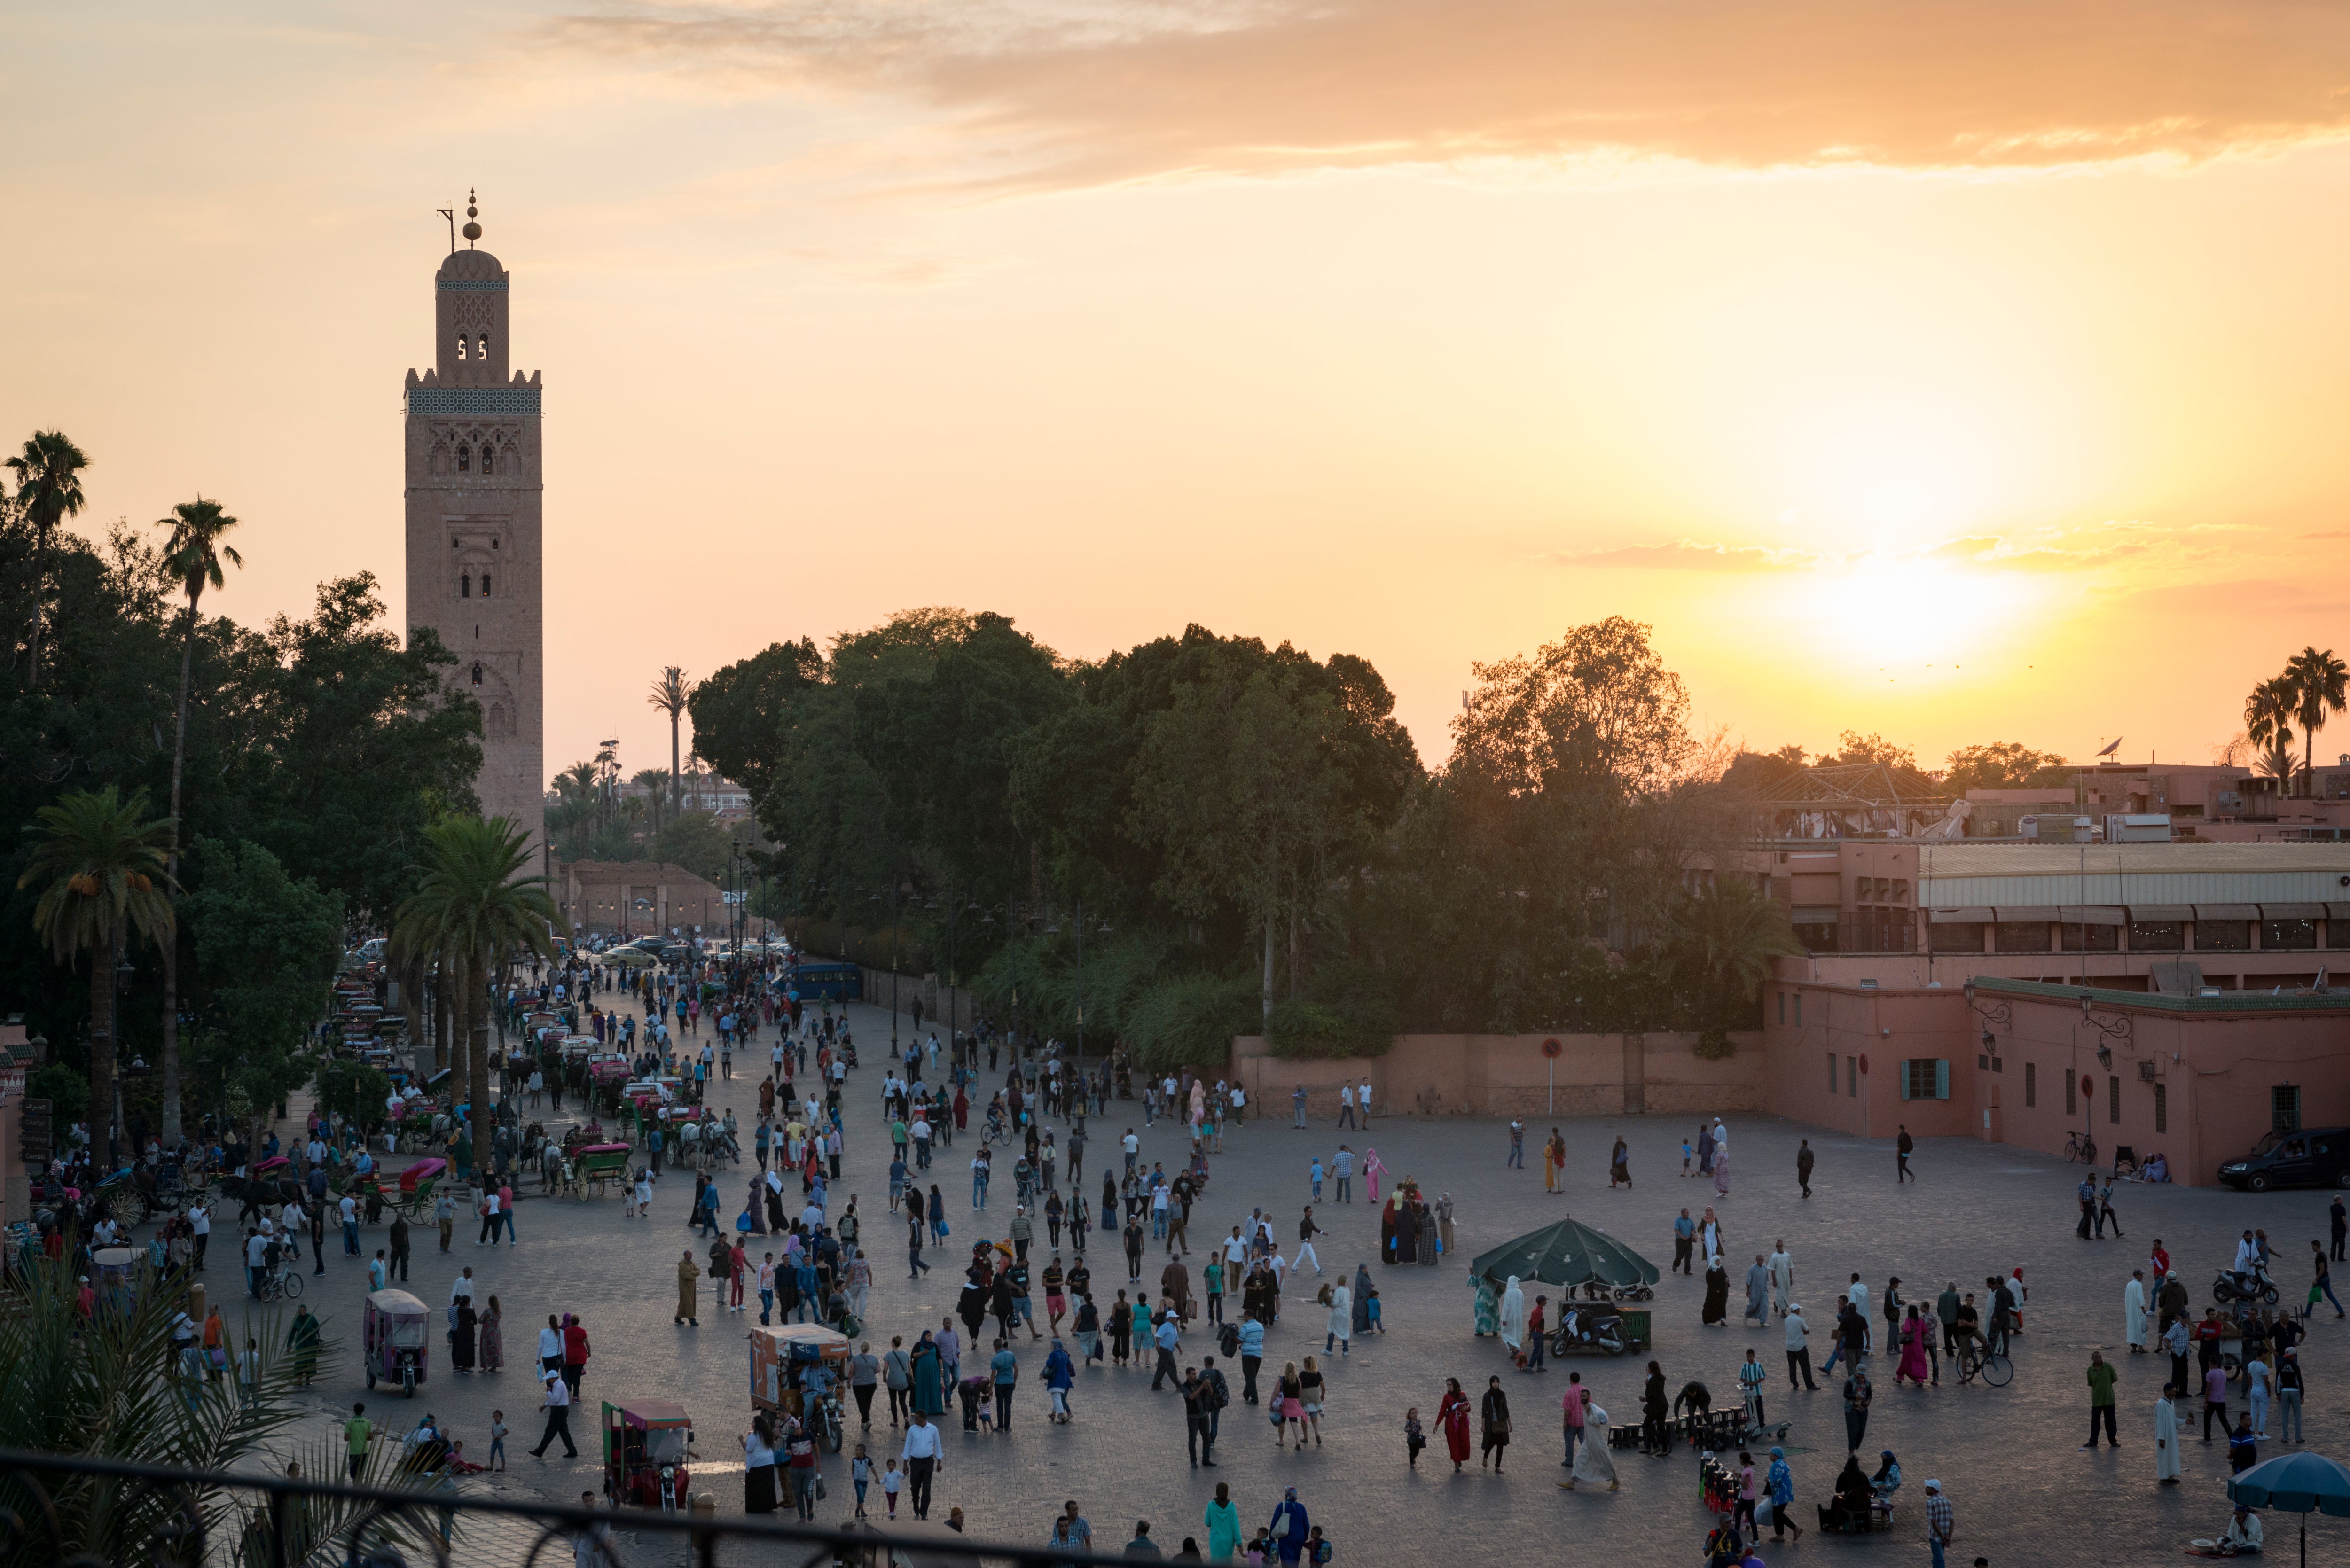 The Koutoubia mosque towers over a square in Marrakech, the final destination